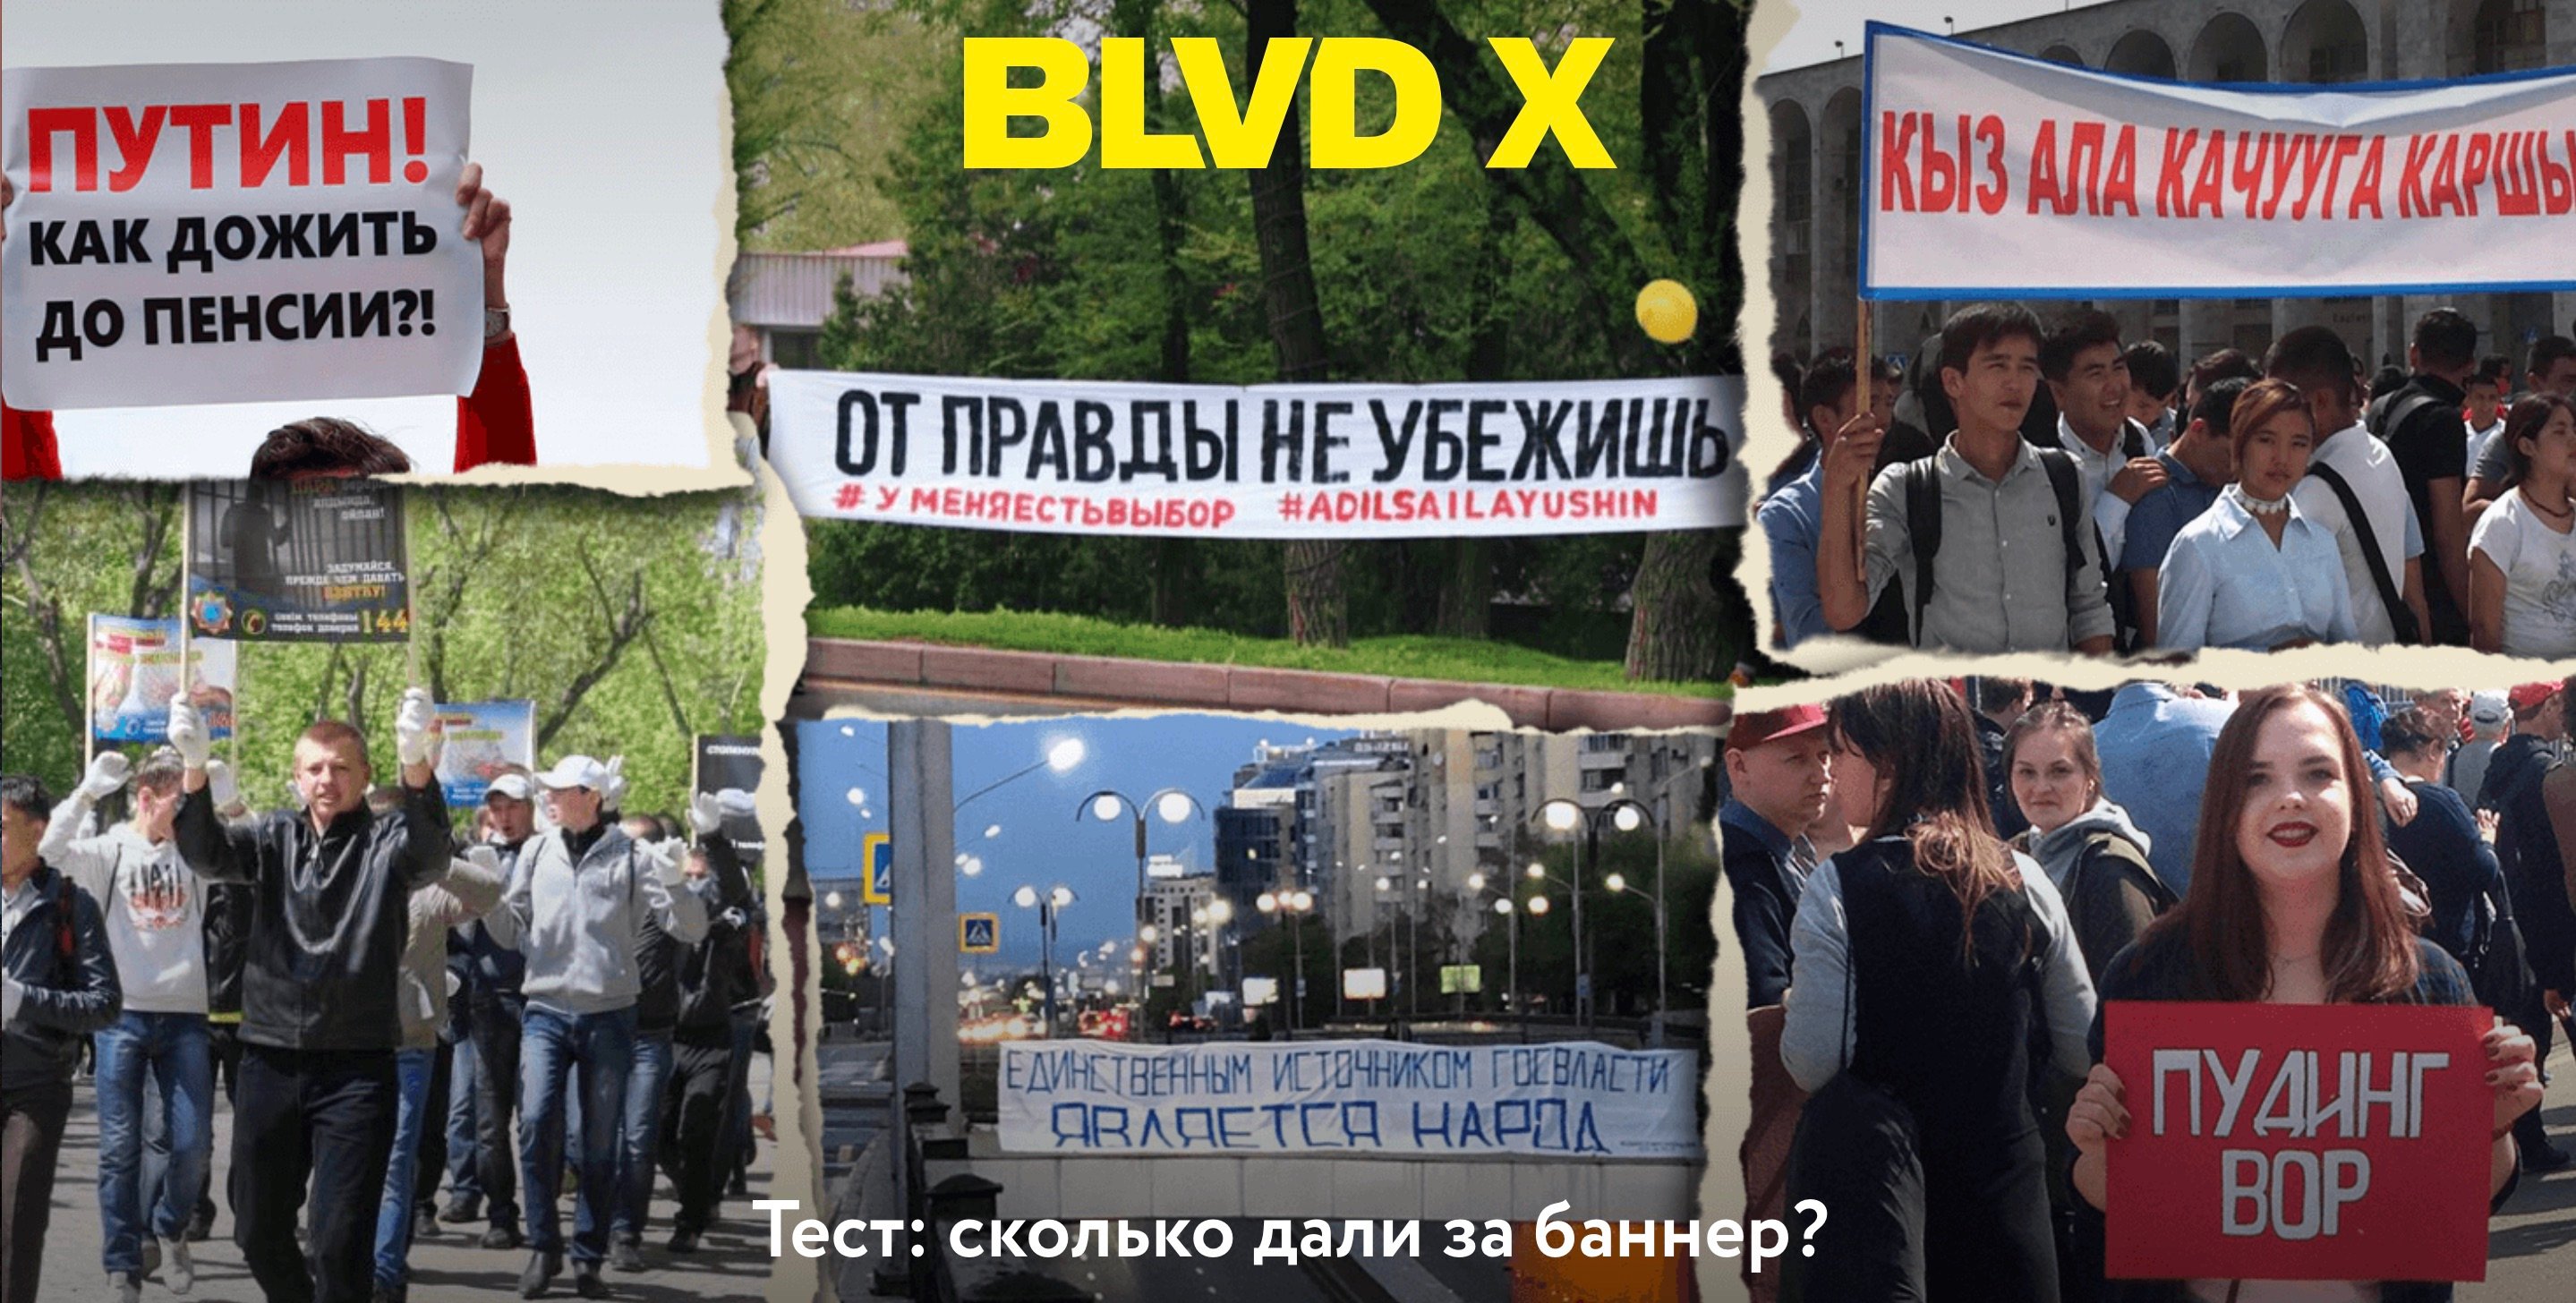 Screenshot of the youth culture website BLVD-x. “Test — how long were they given for their banner?”